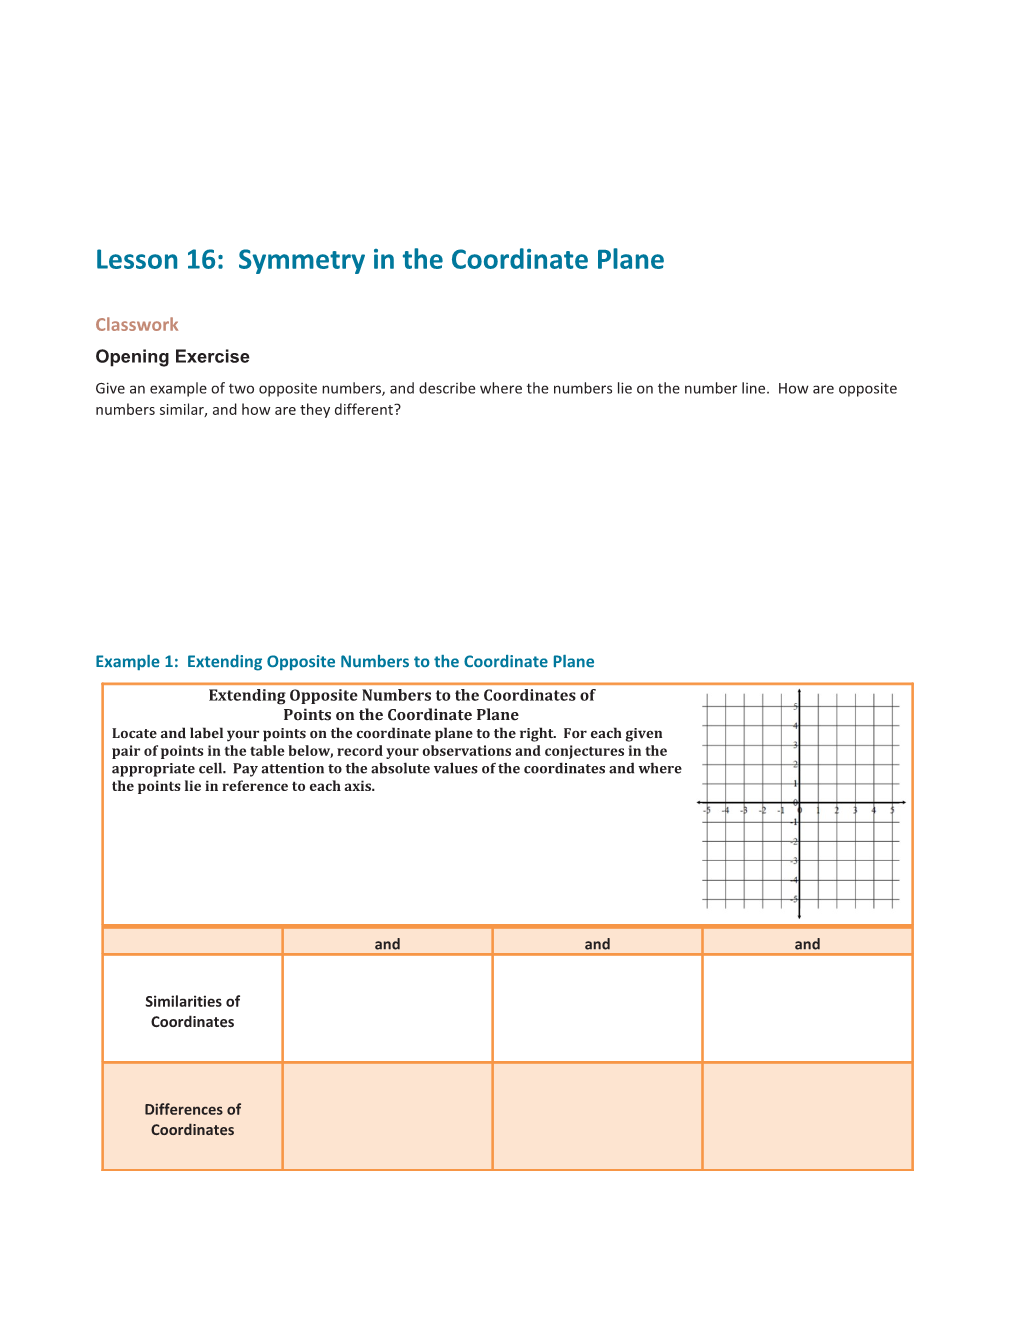 Lesson 16: Symmetry in the Coordinate Plane